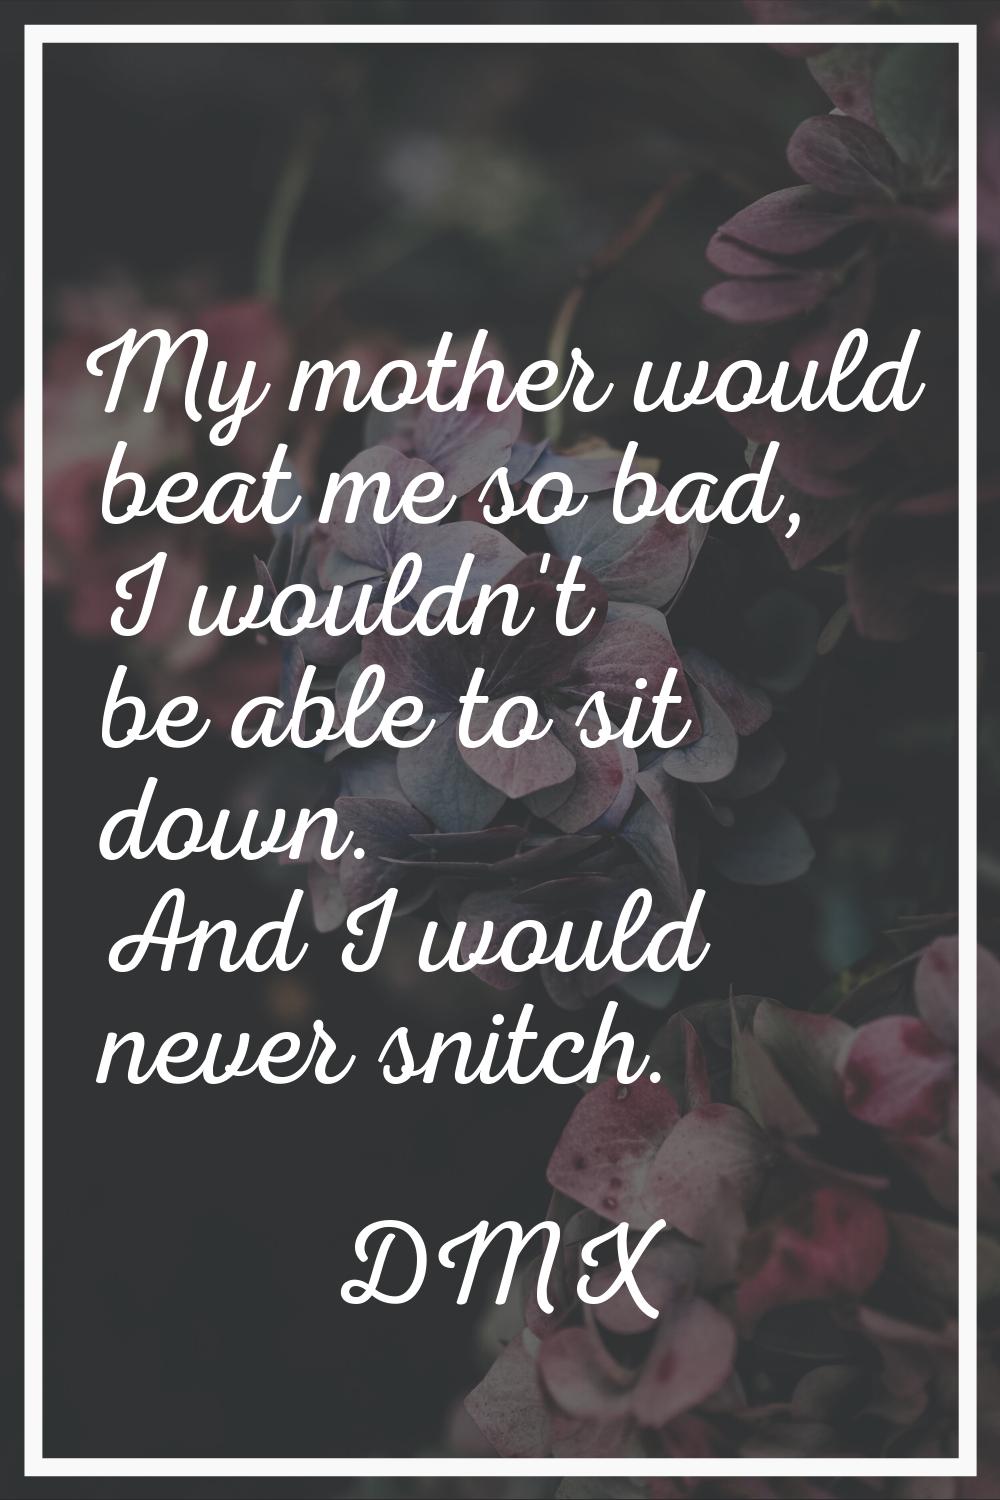 My mother would beat me so bad, I wouldn't be able to sit down. And I would never snitch.